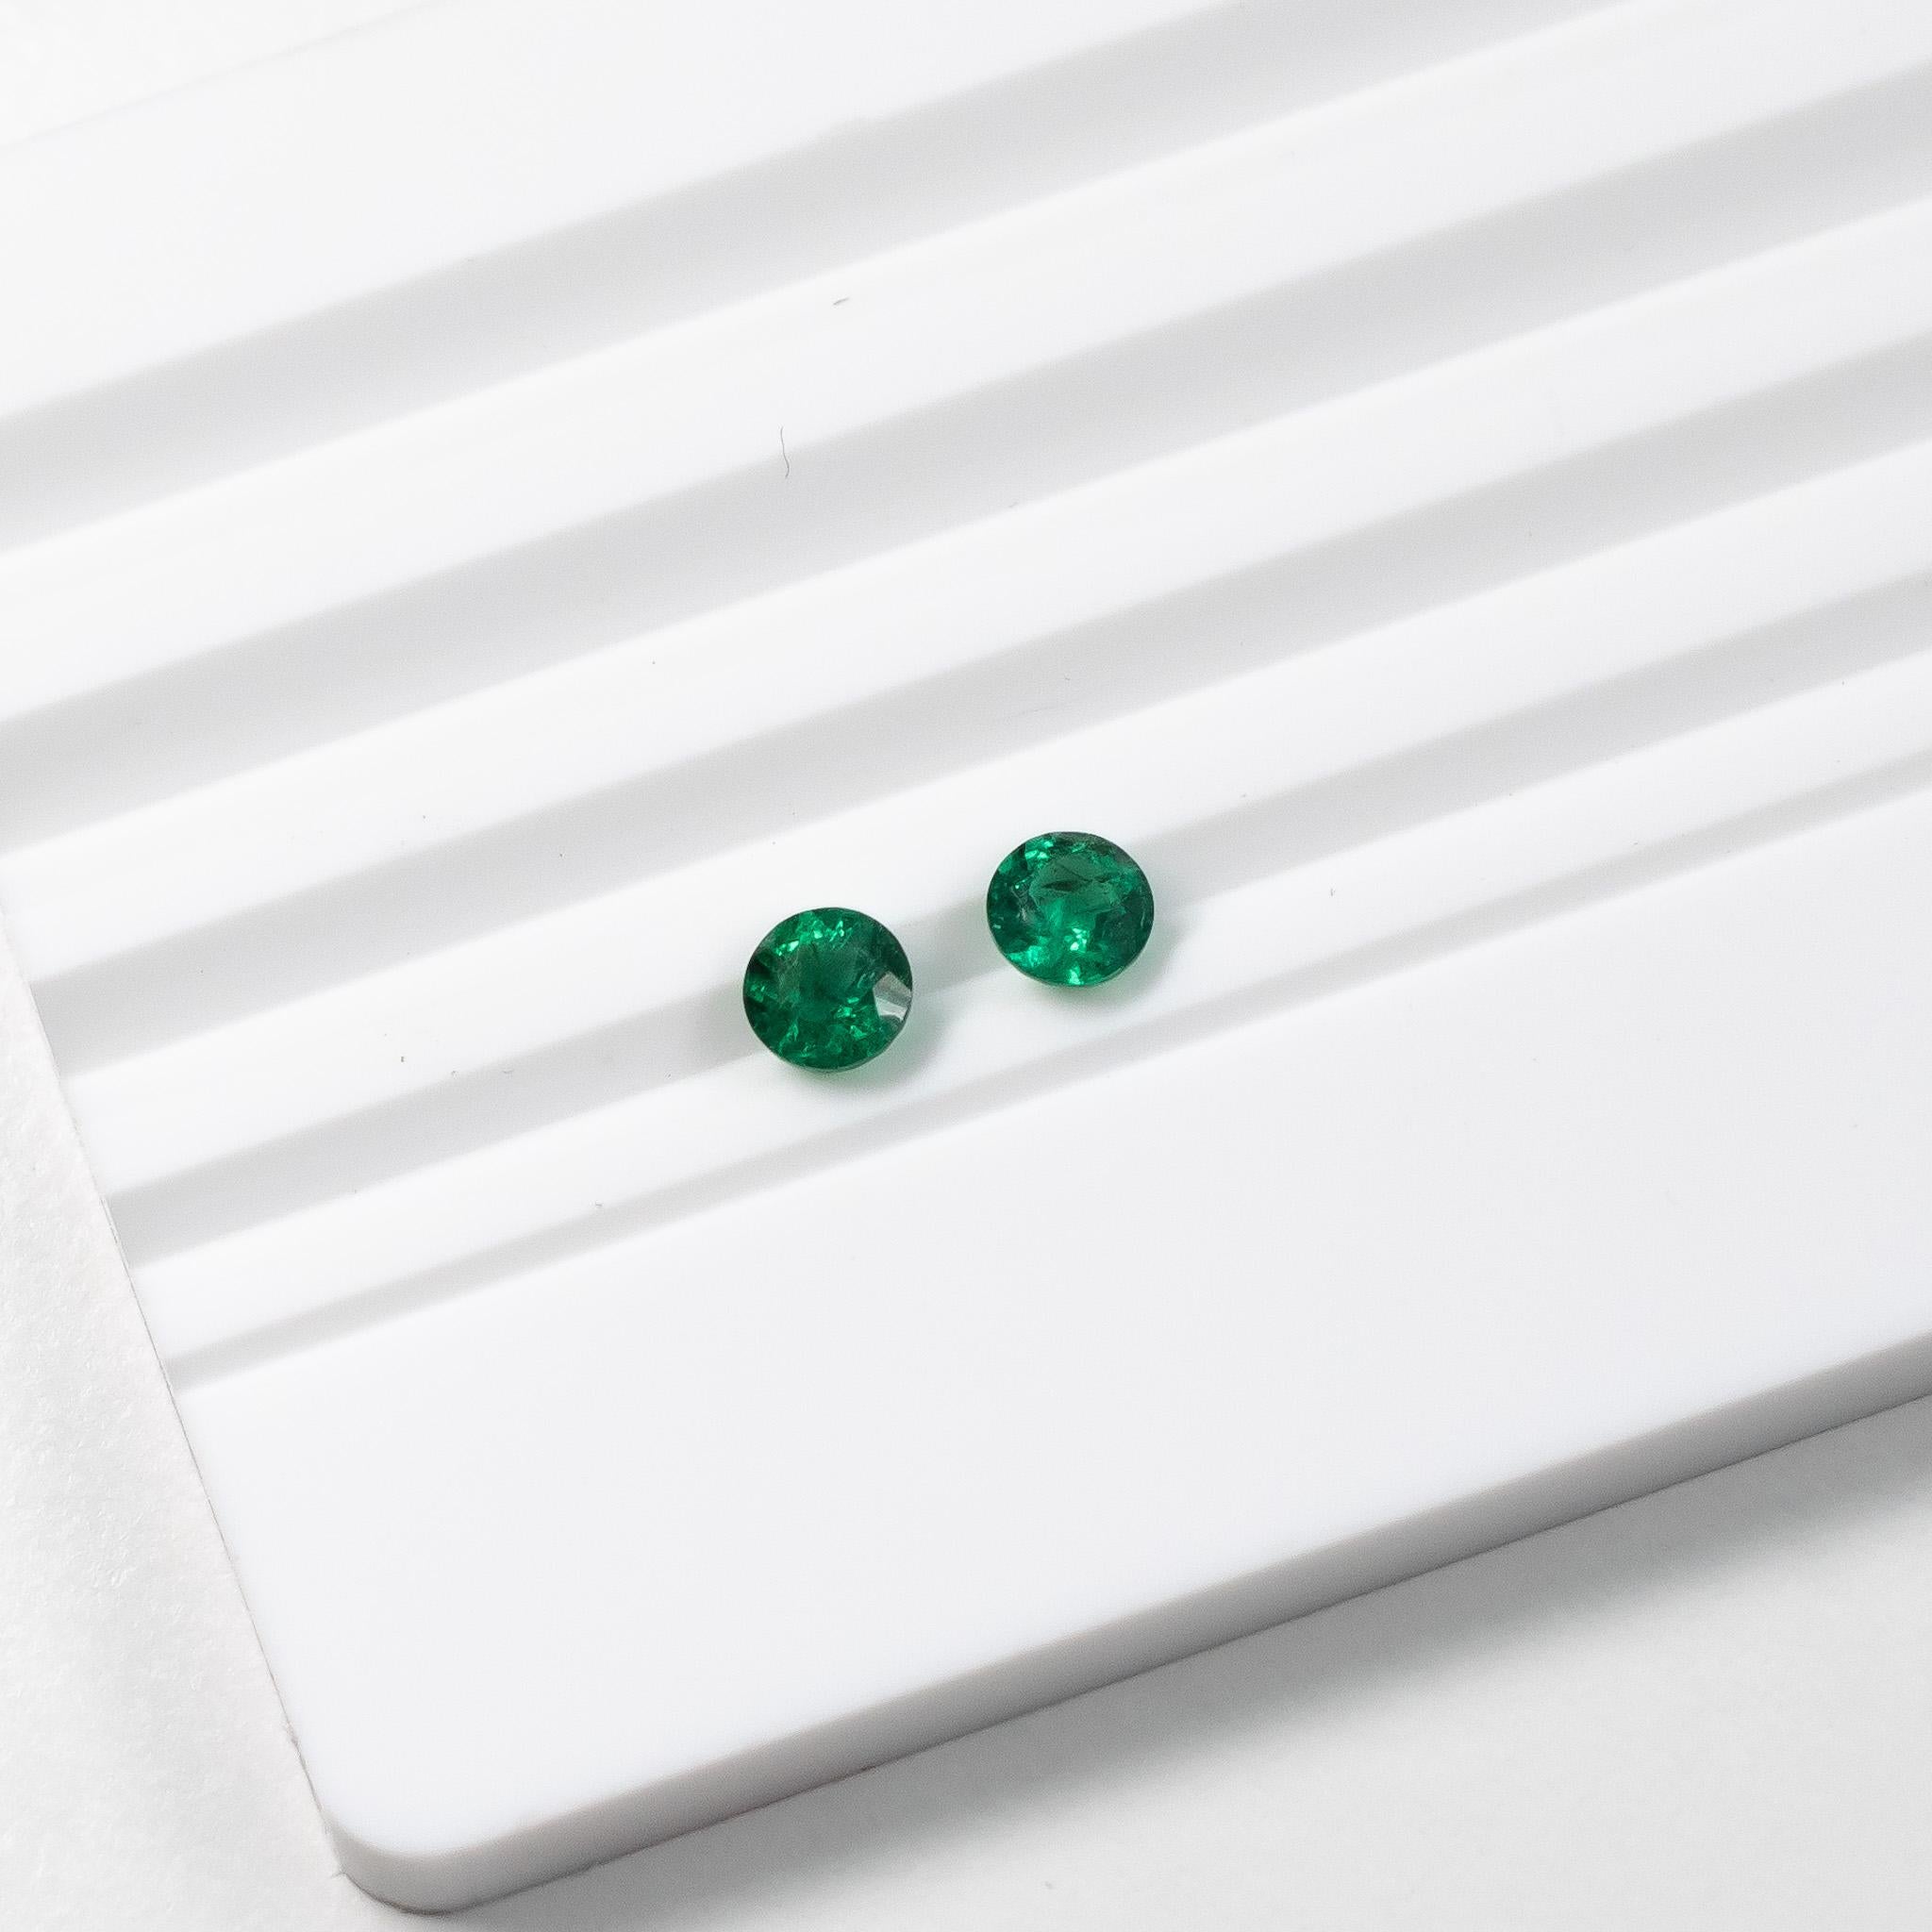 Beautiful round green emerald stud earrings set in Platinum. 

These natural Zambian green emeralds are a stunning vivid green colour. The studs are set in a three prong martini setting with a butterfly push back. 

The emeralds are full of live and